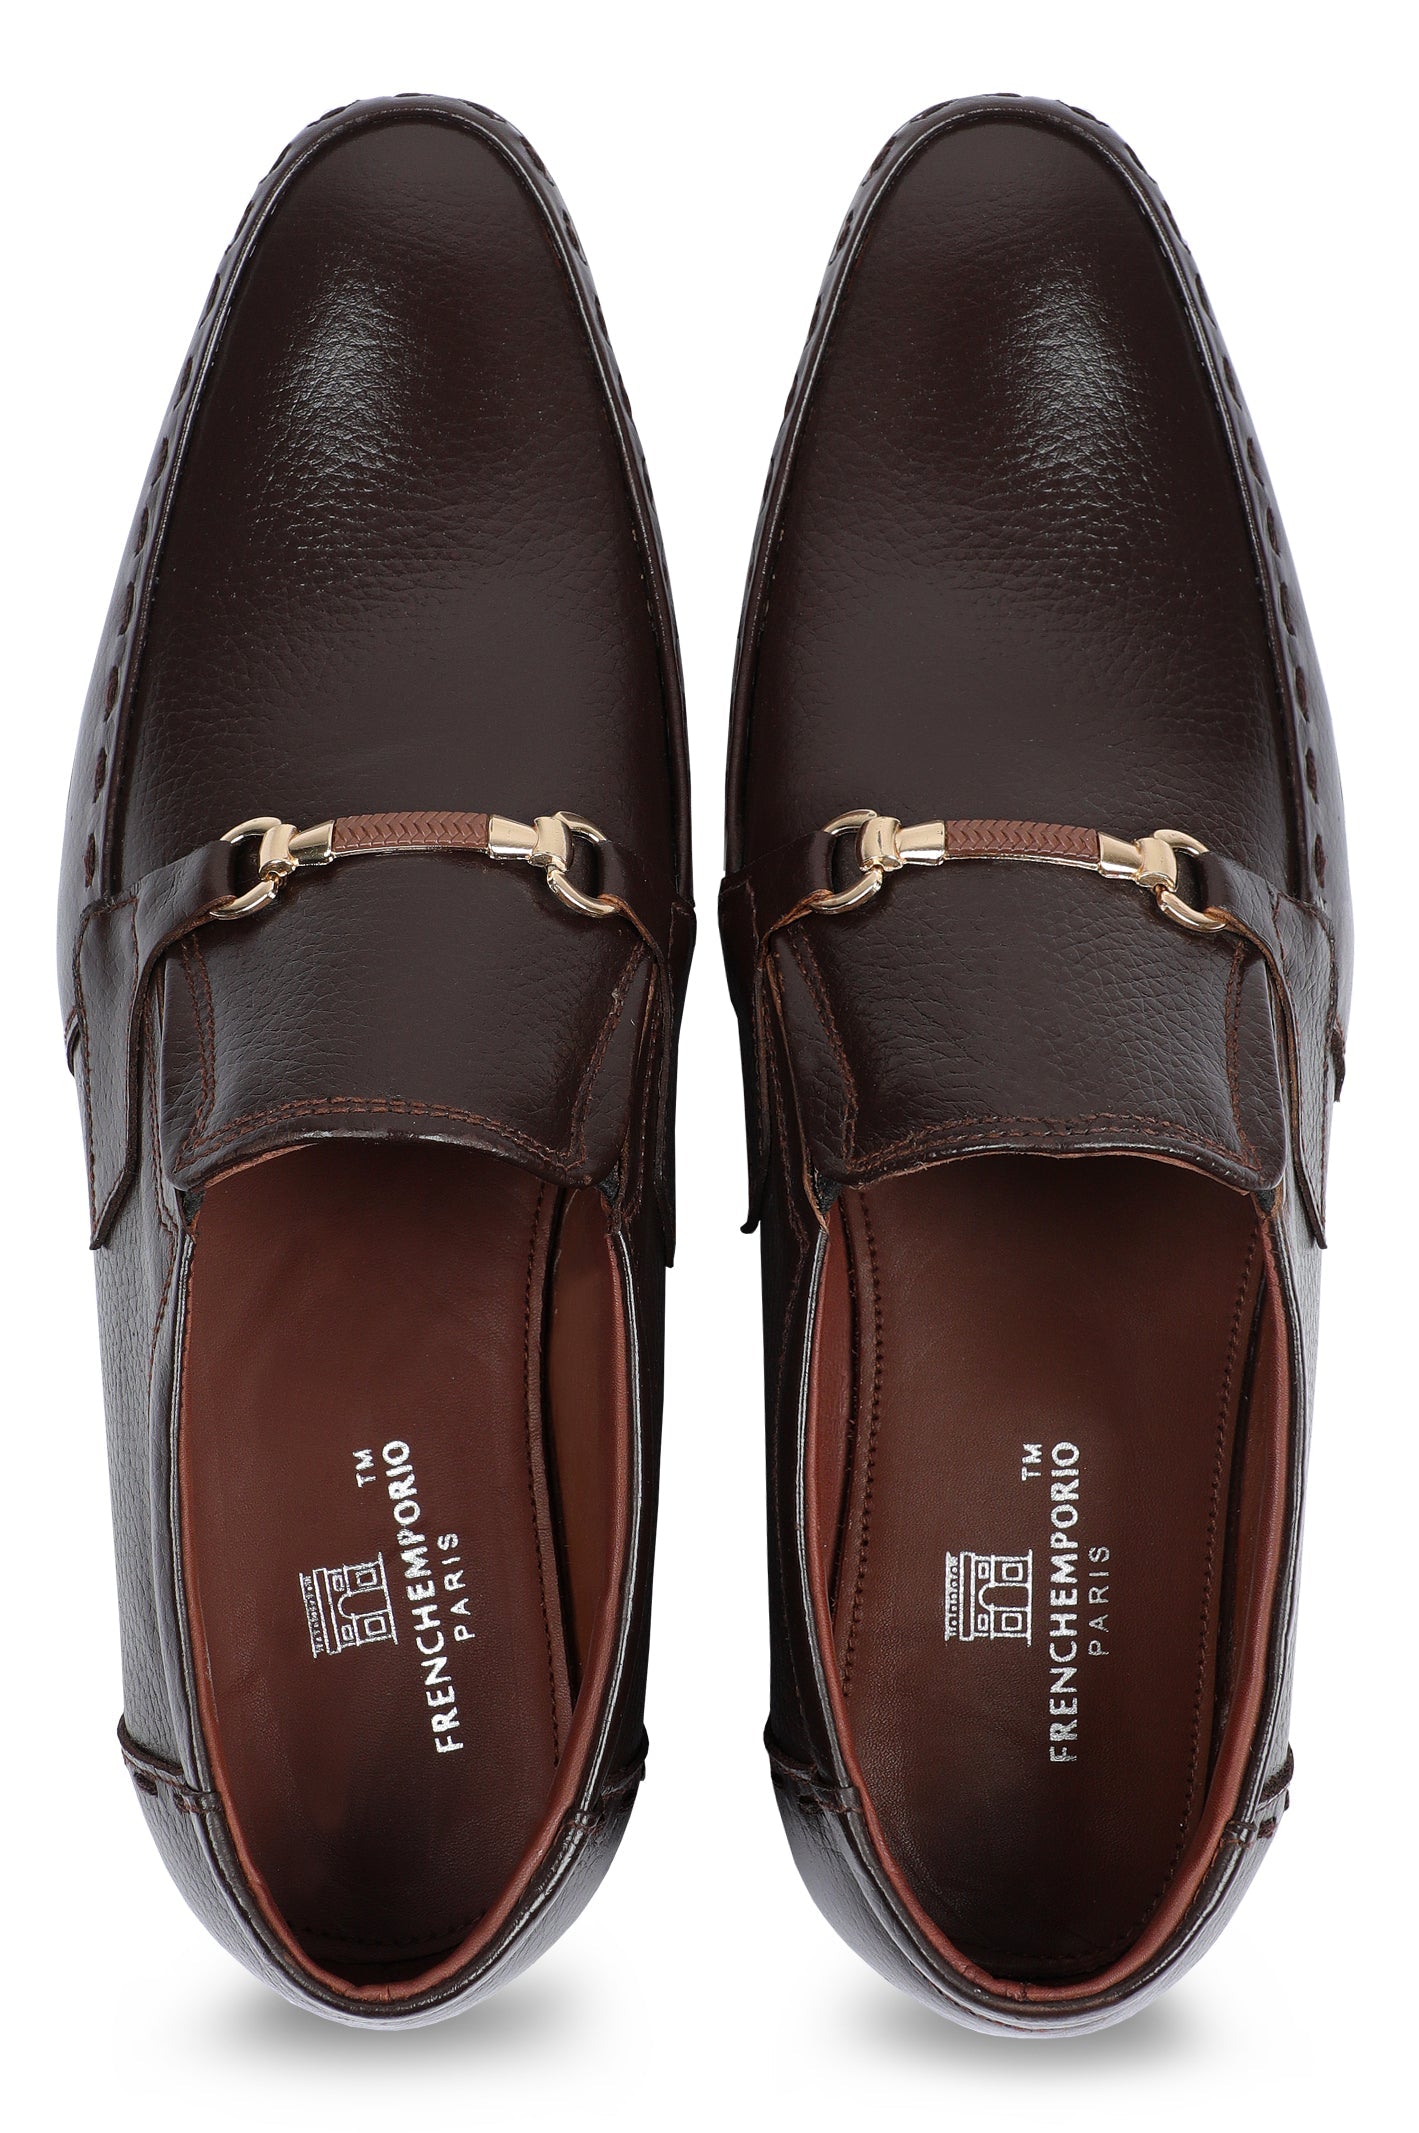 Formal Shoes For Men in Coffee SKU: SMF-0198-COFFEE - Diners